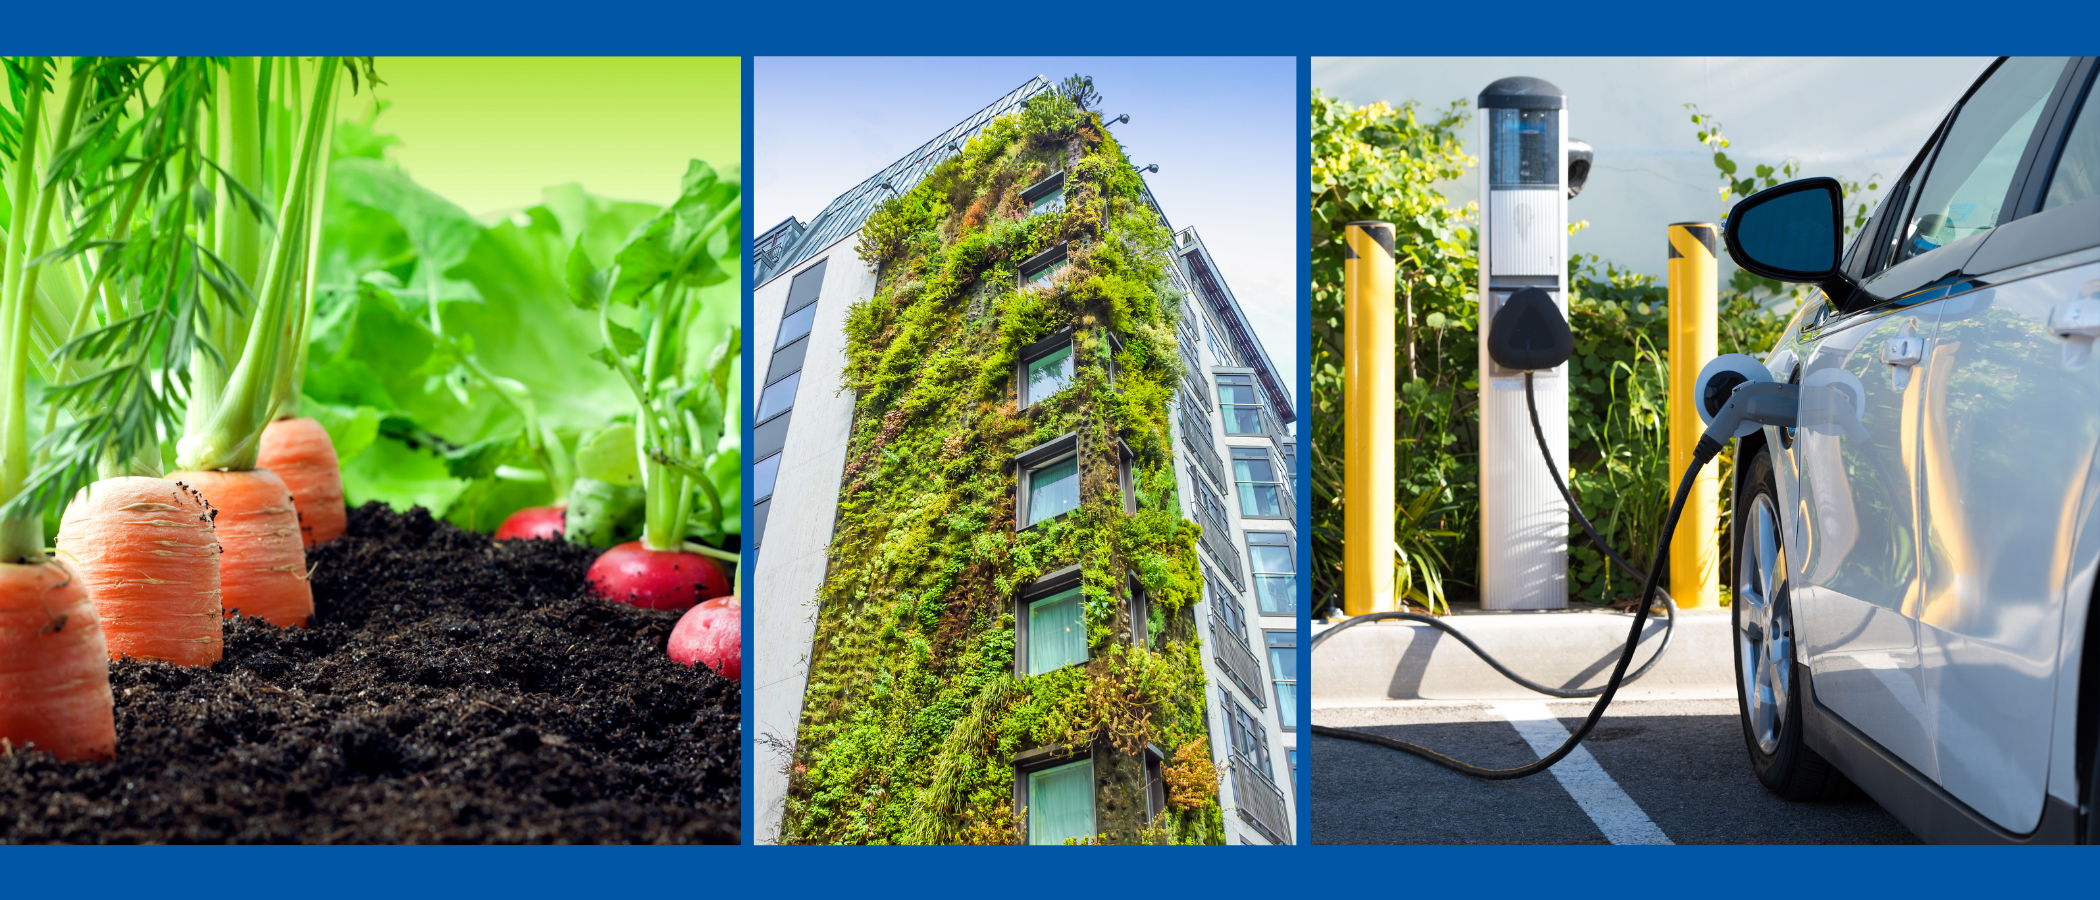 a collage of growing veg, a green building from foliage and an electric car